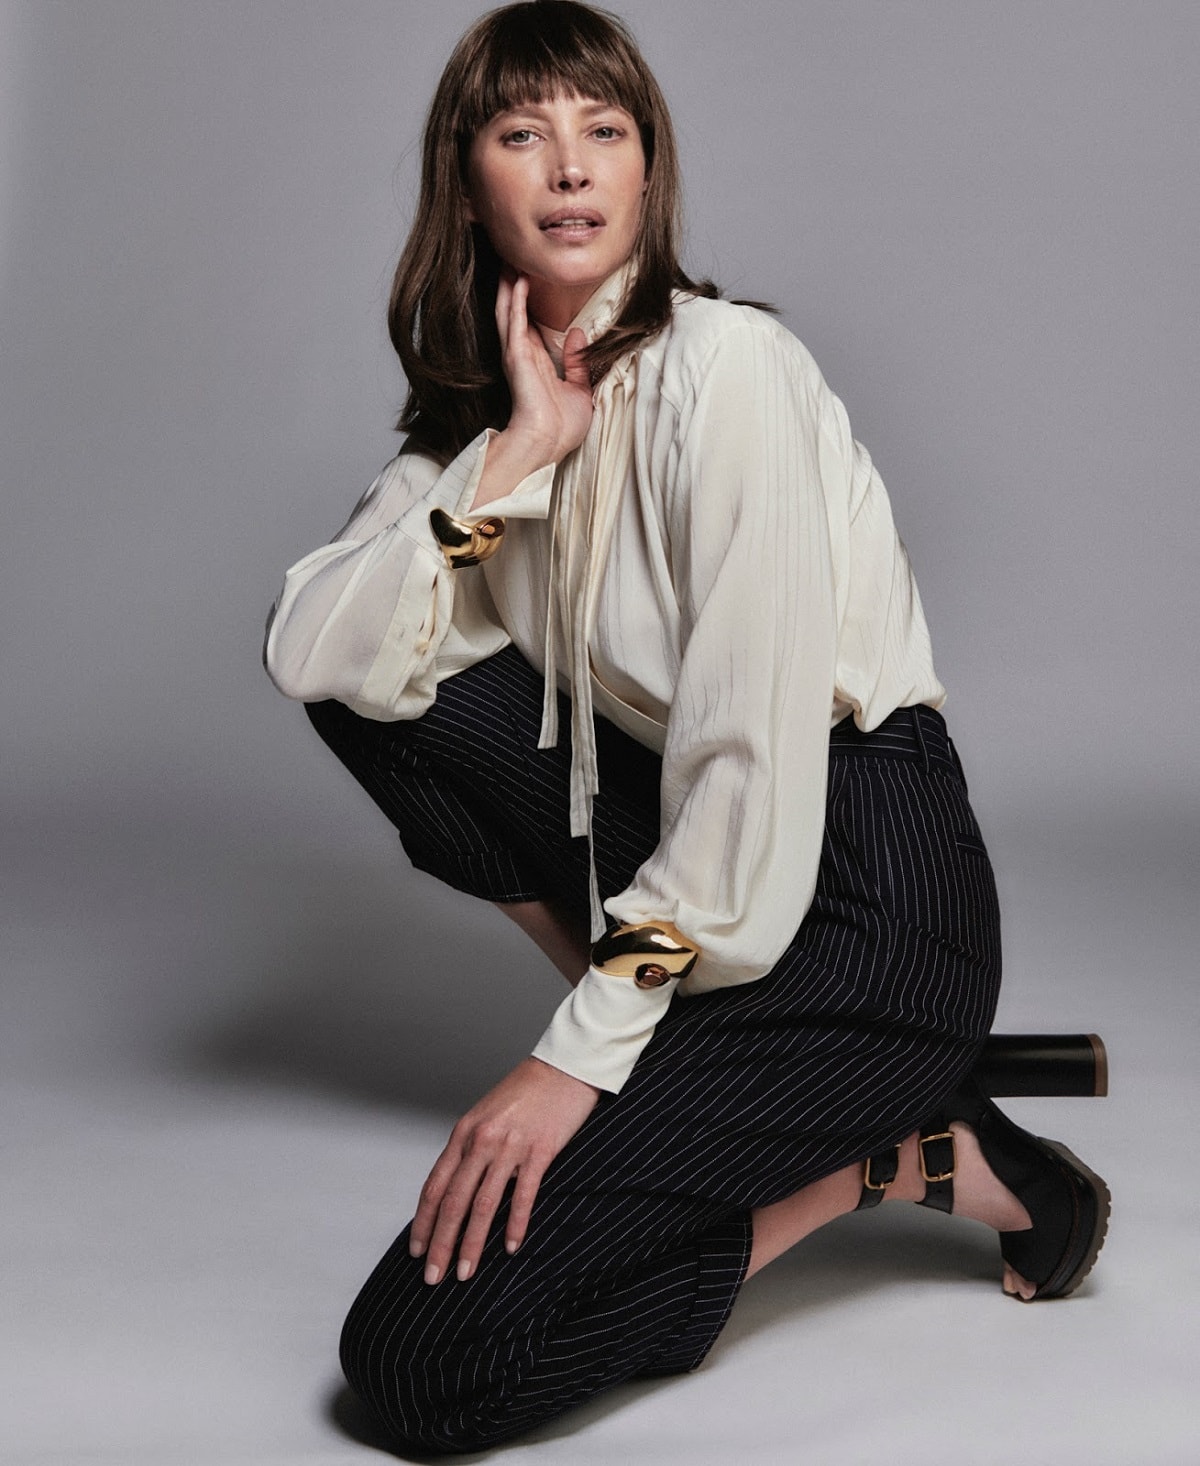 Christy Turlington by Chris Colls for The New York Times Style Magazine Singapore April 2020